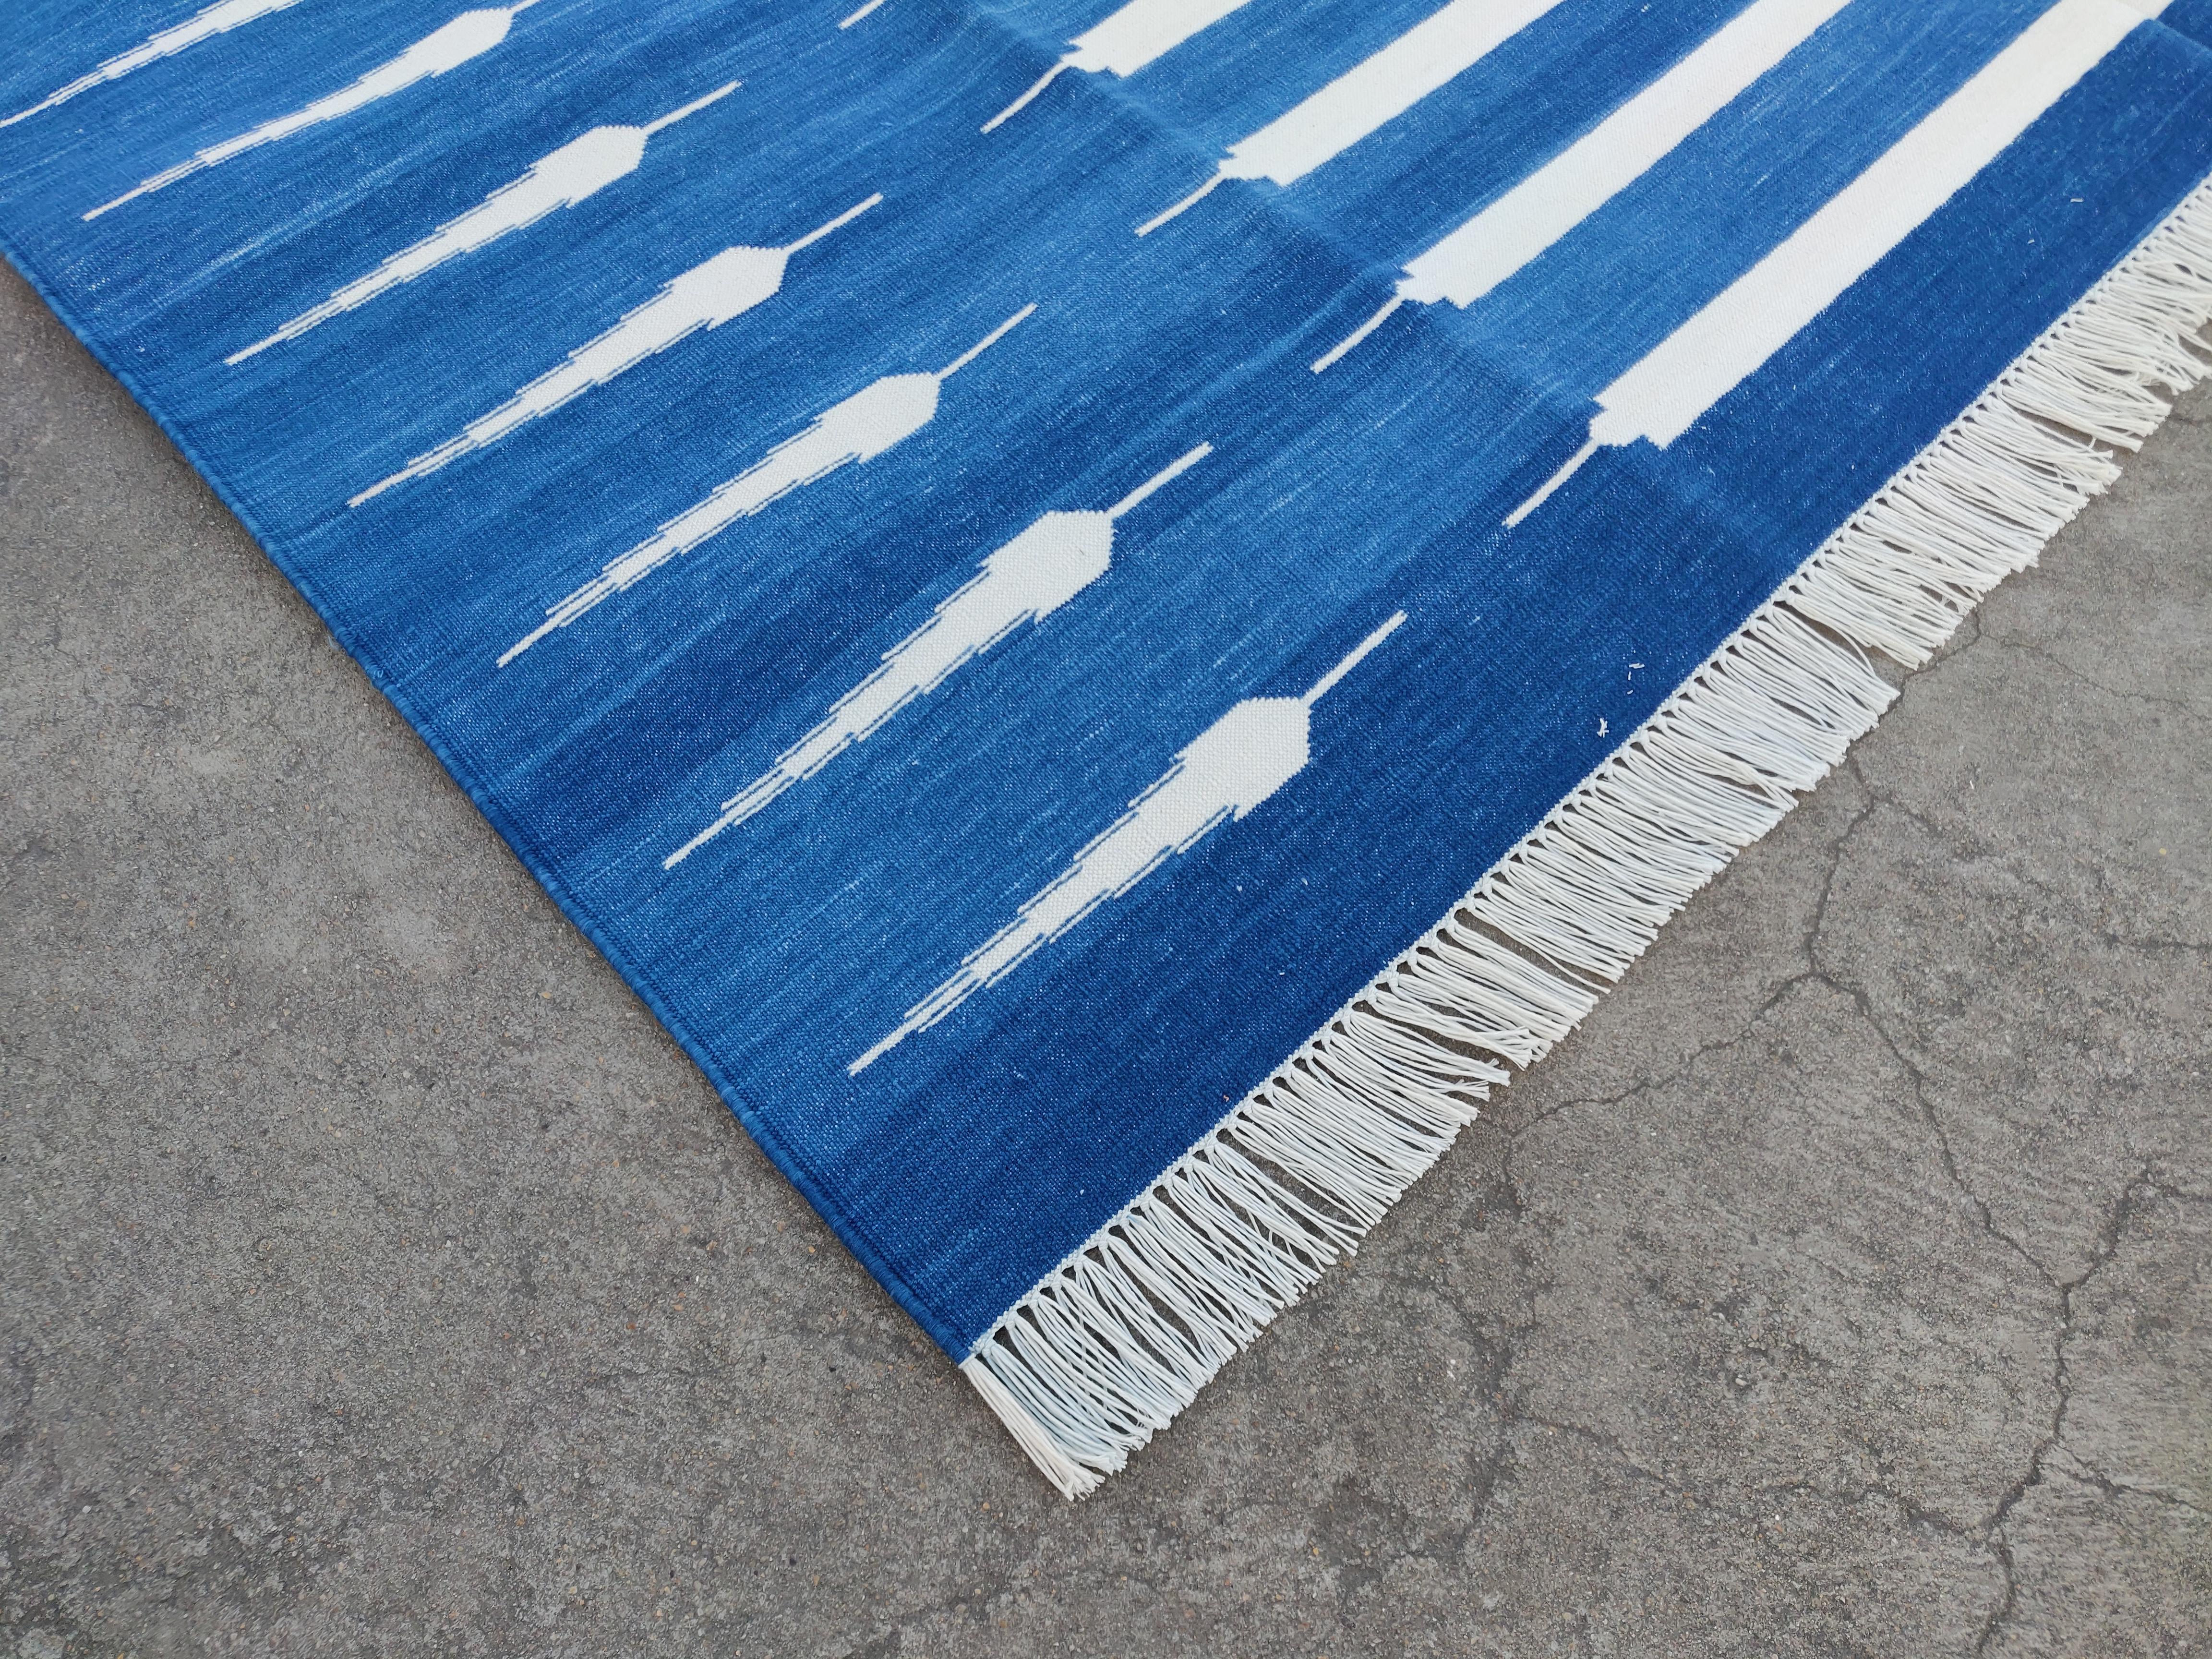 Mid-Century Modern Handmade Cotton Area Flat Weave Rug, 6x9 Blue And White Striped Indian Dhurrie For Sale